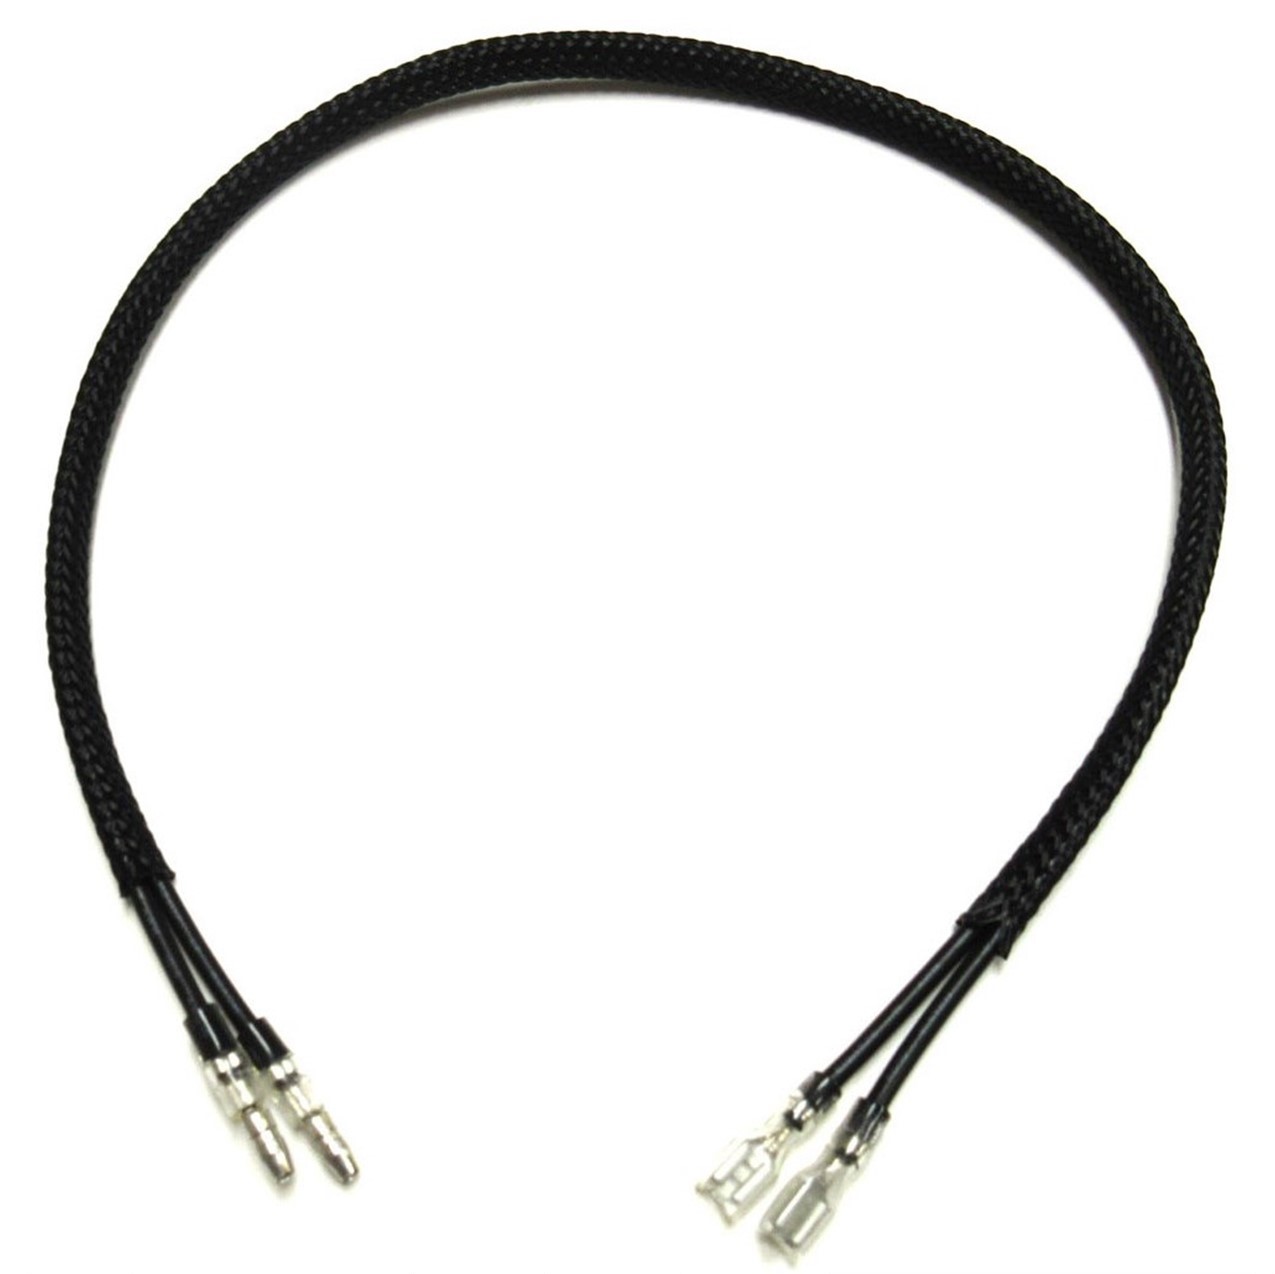 Brake Switch Wiring Harness (Total length = 20") For Scooters & ATV's that use the screw mounted brake switch w/two terminals.